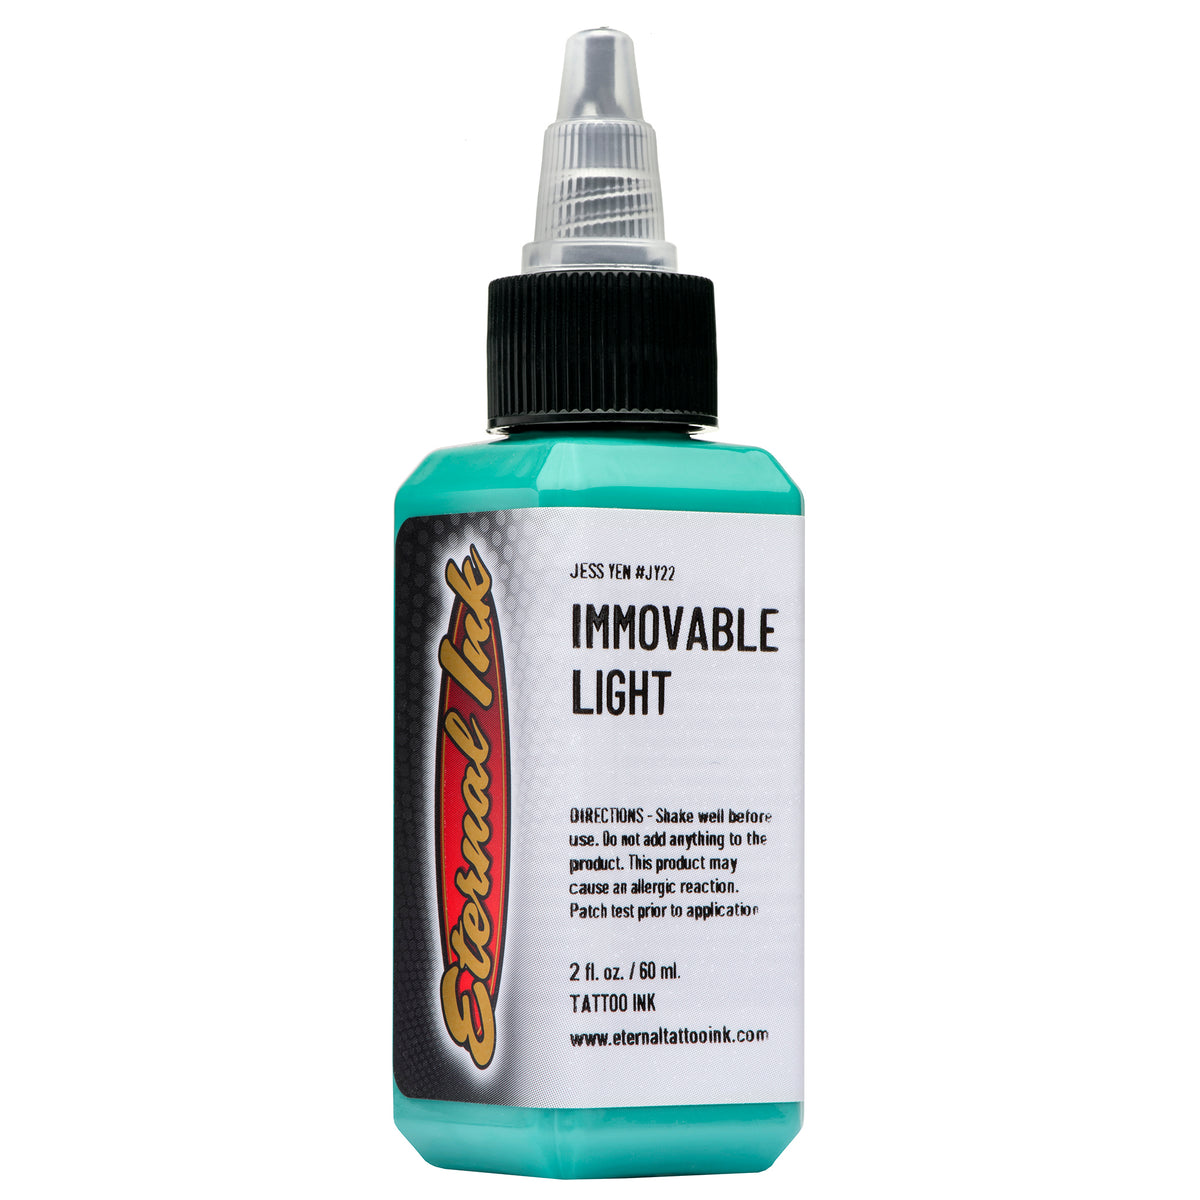 Immovable Light